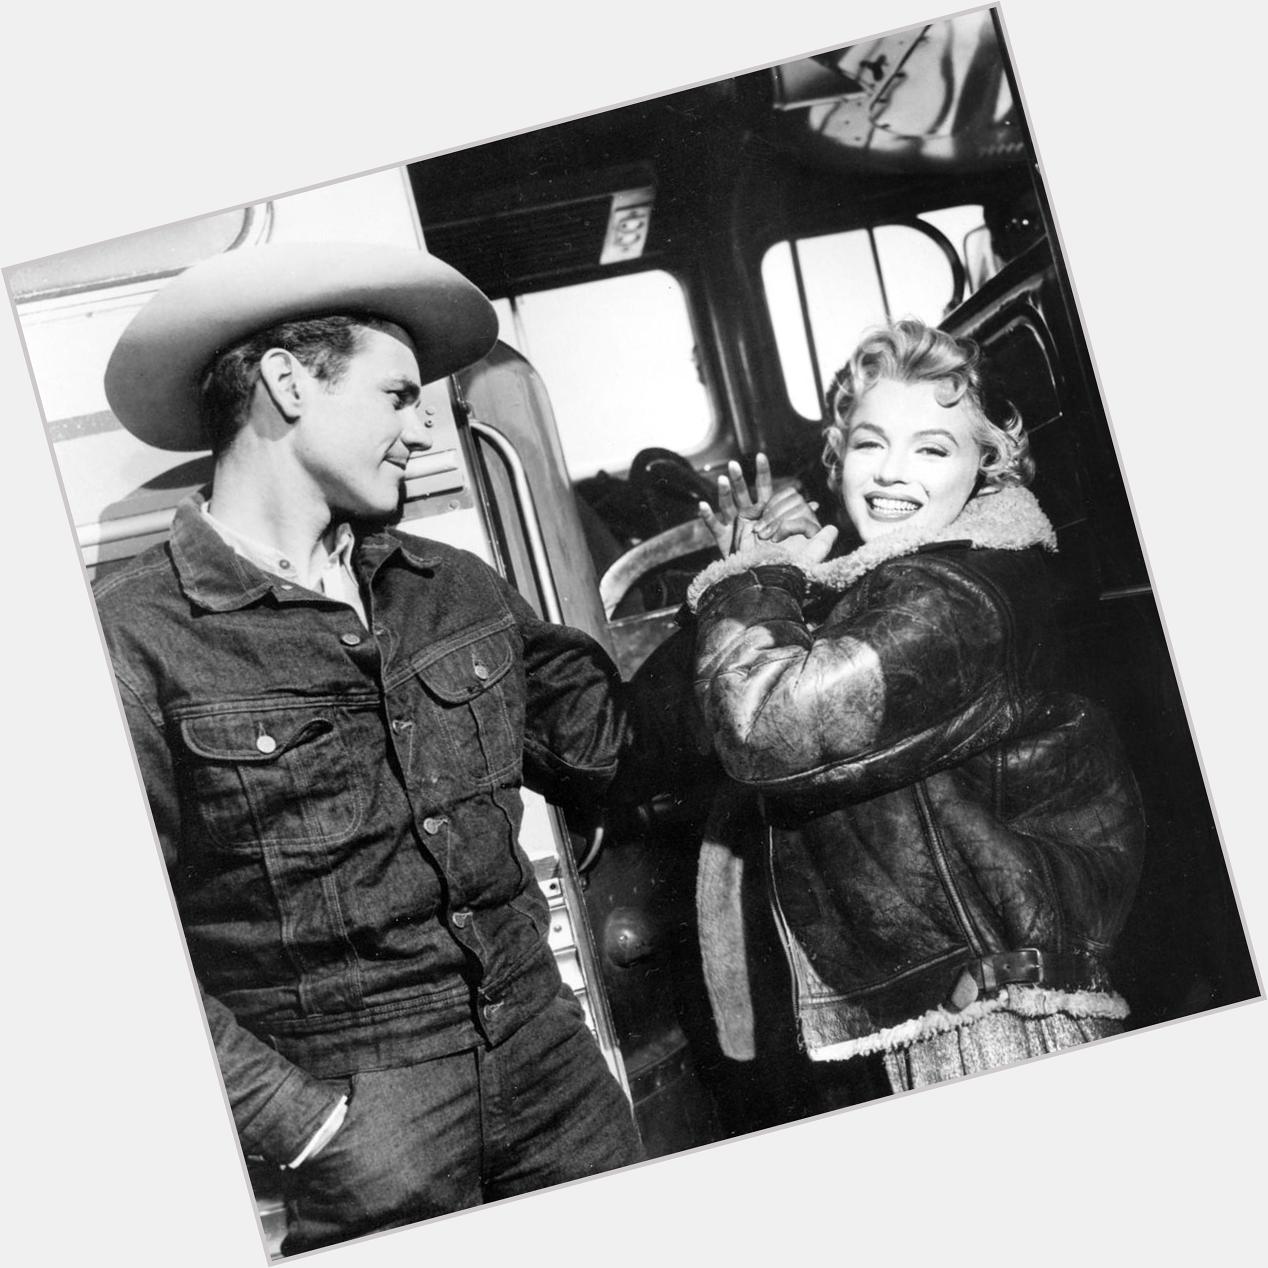 Wishing Don Murray a happy birthday, seen here with Marilyn Monroe in BUS STOP (\56). 